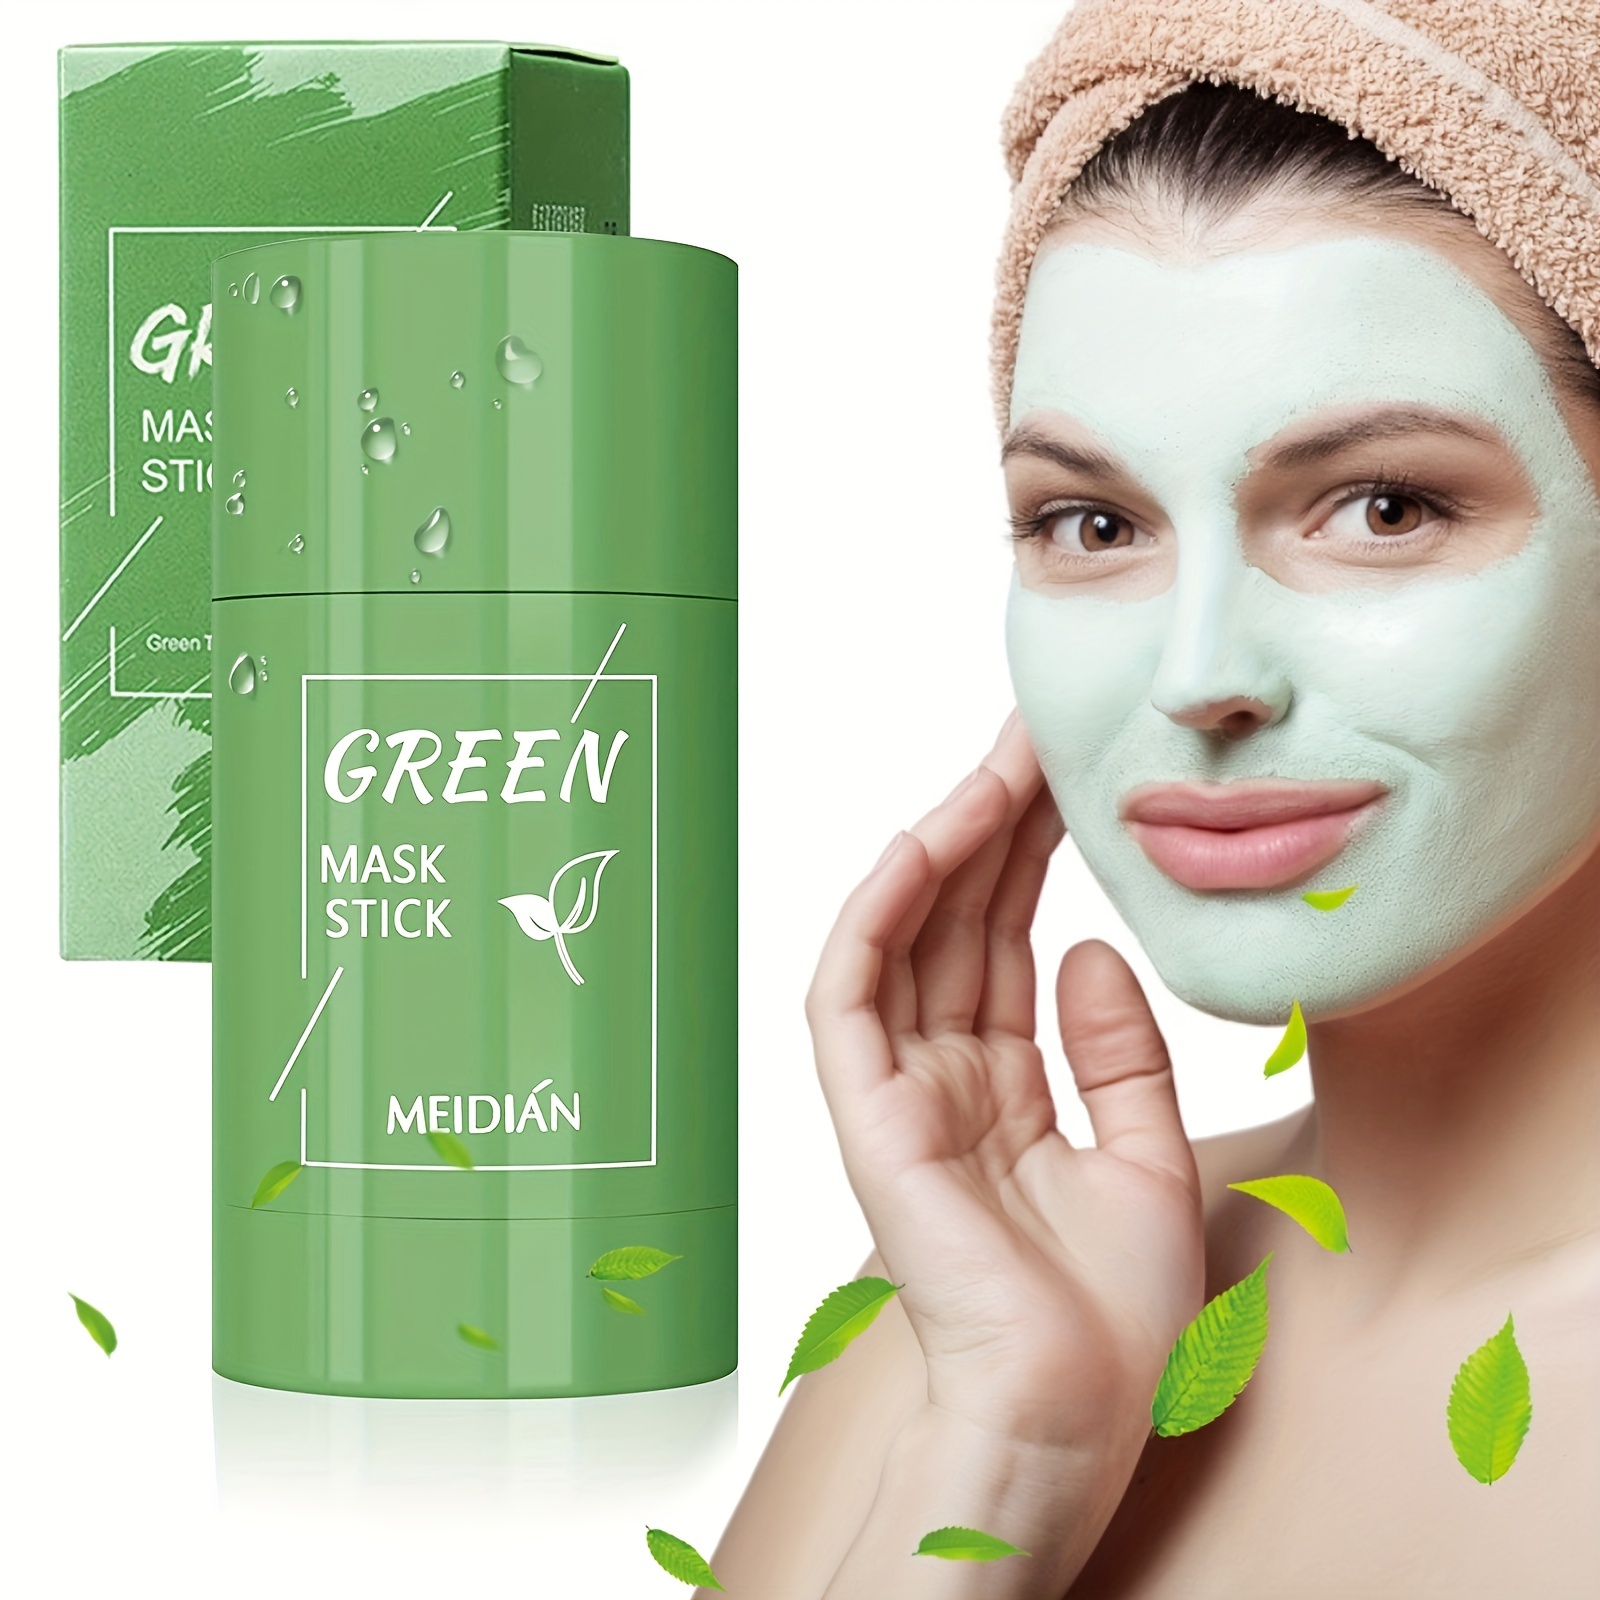 

Green Tea Mask Stick - Deep Cleansing And Oil Control For All Skin Types - Moisturizes, Tightens, Perfect For Men And Women